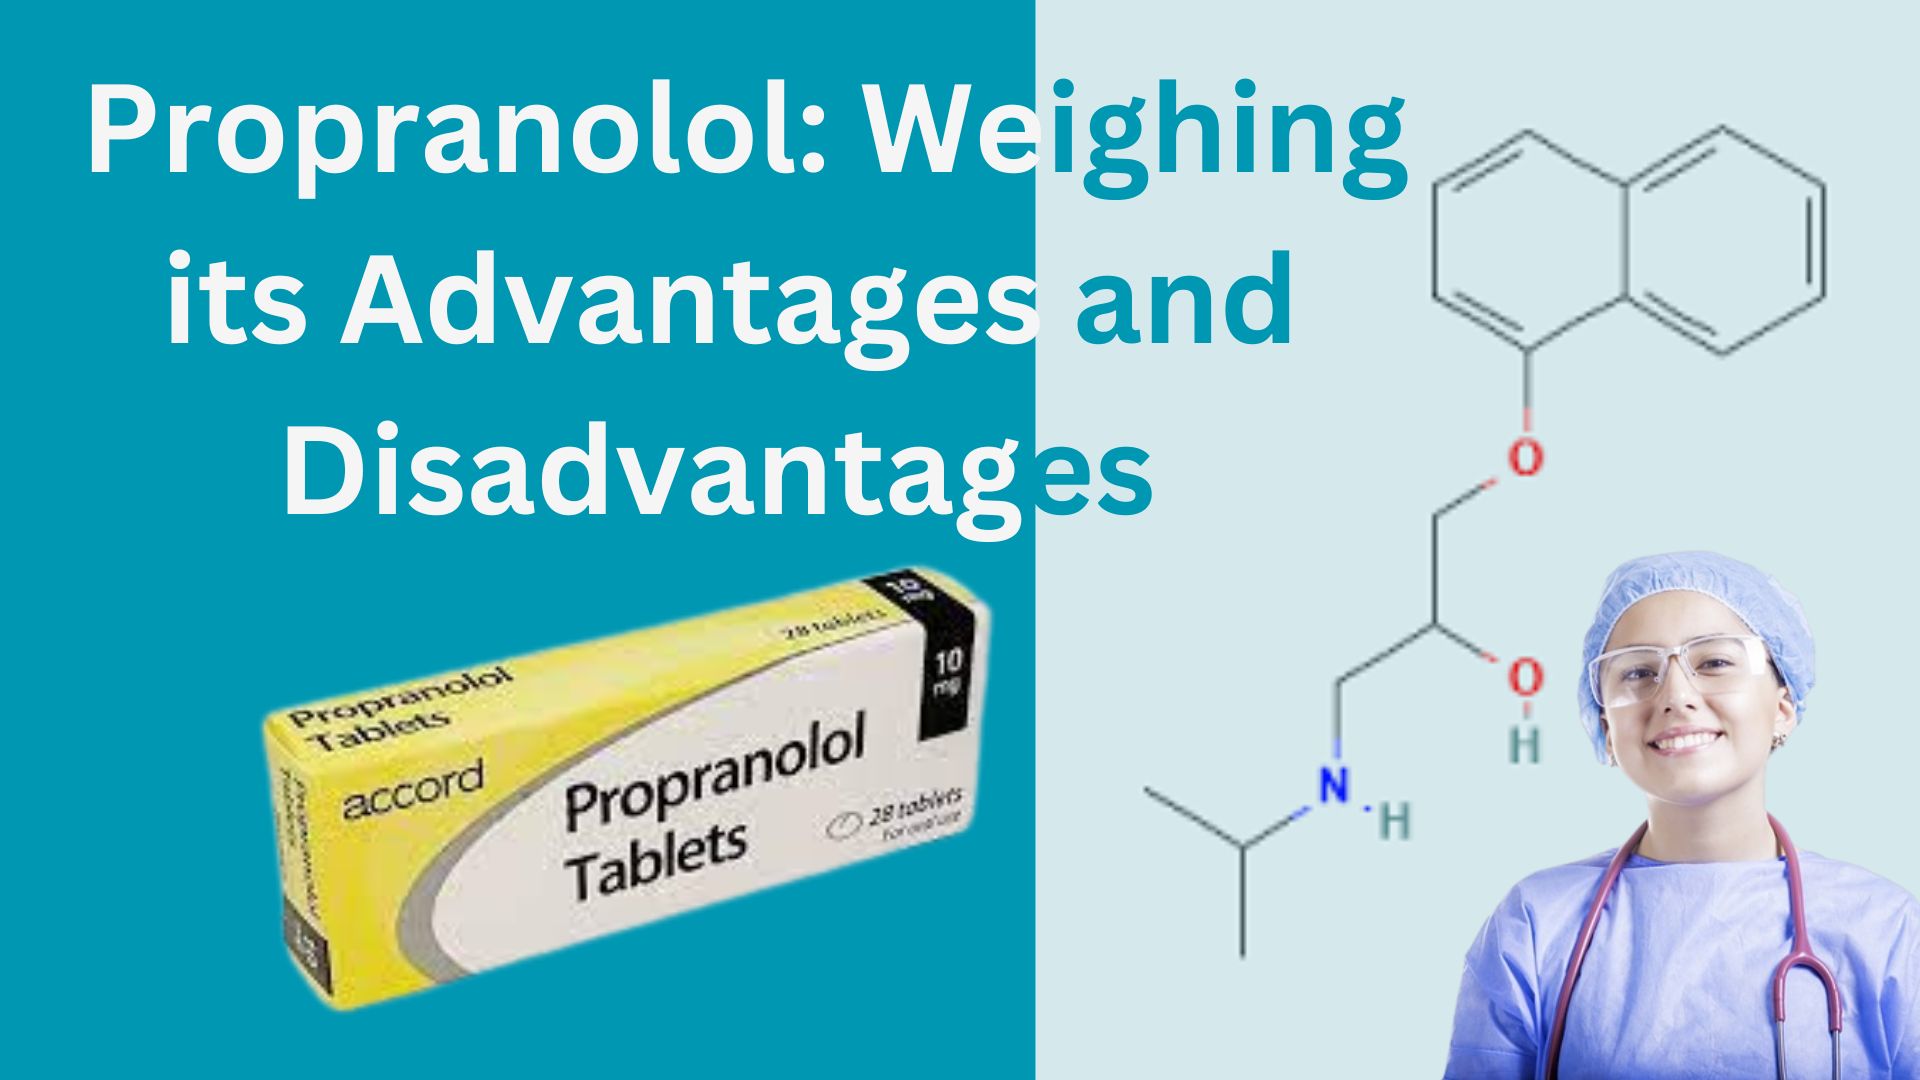 Propranolol: Weighing its Advantages and Disadvantages 